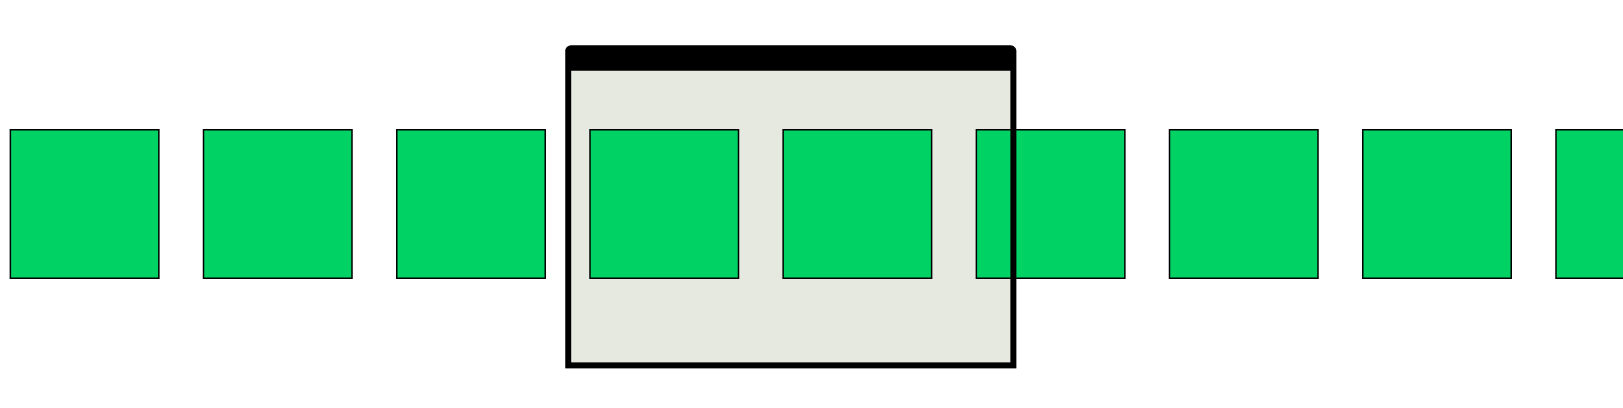 Example of carousel layout